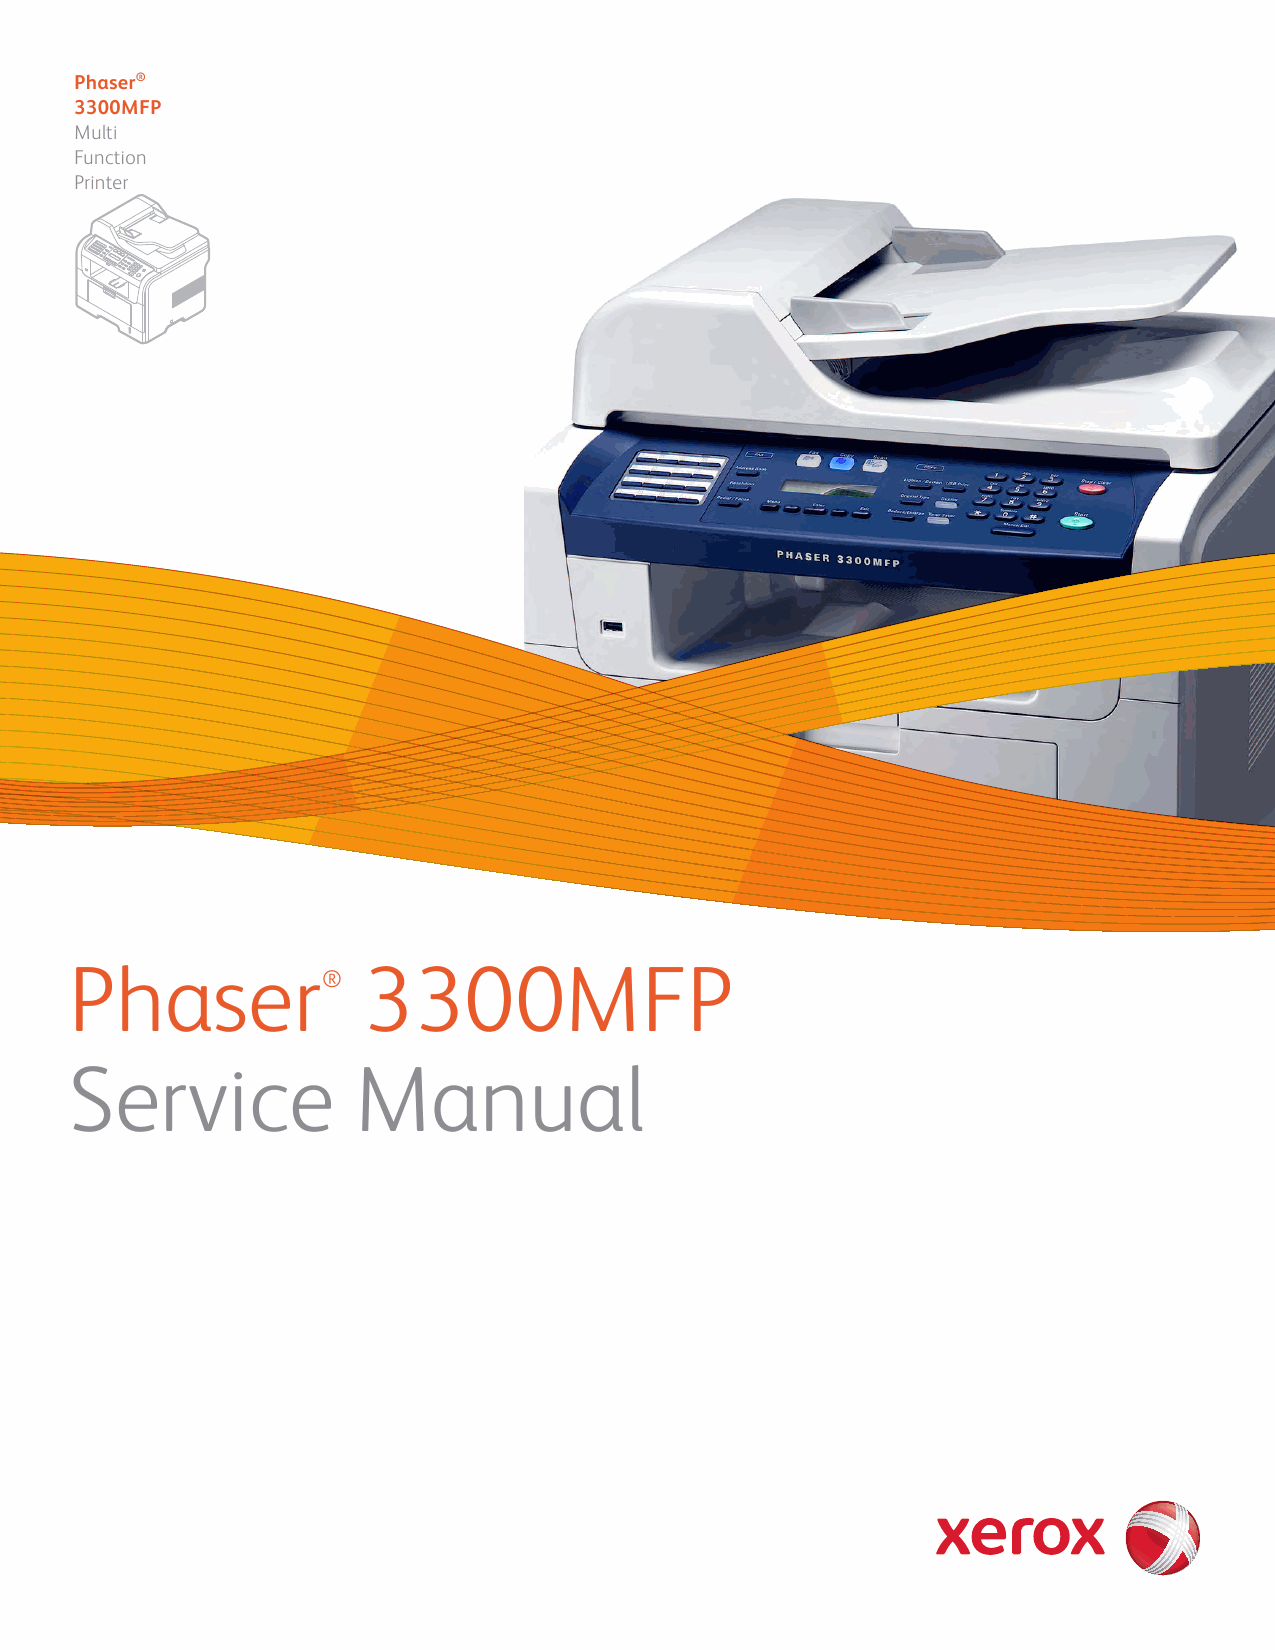 Xerox Phaser 3300-MFP Parts List and Service Manual-1